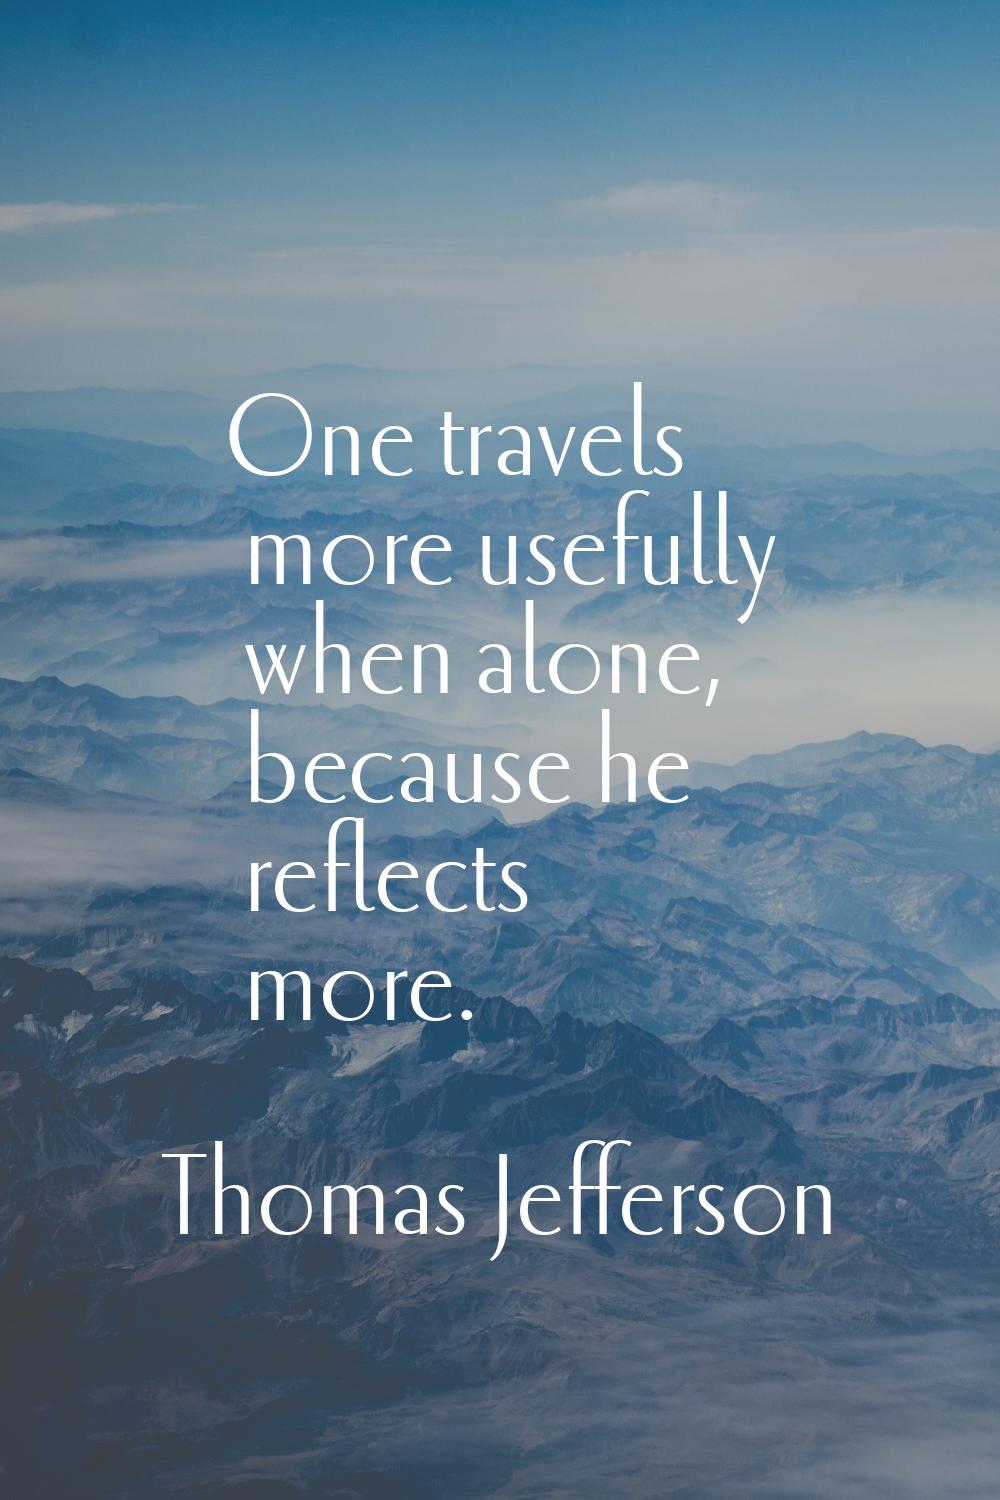 One travels more usefully when alone, because he reflects more.